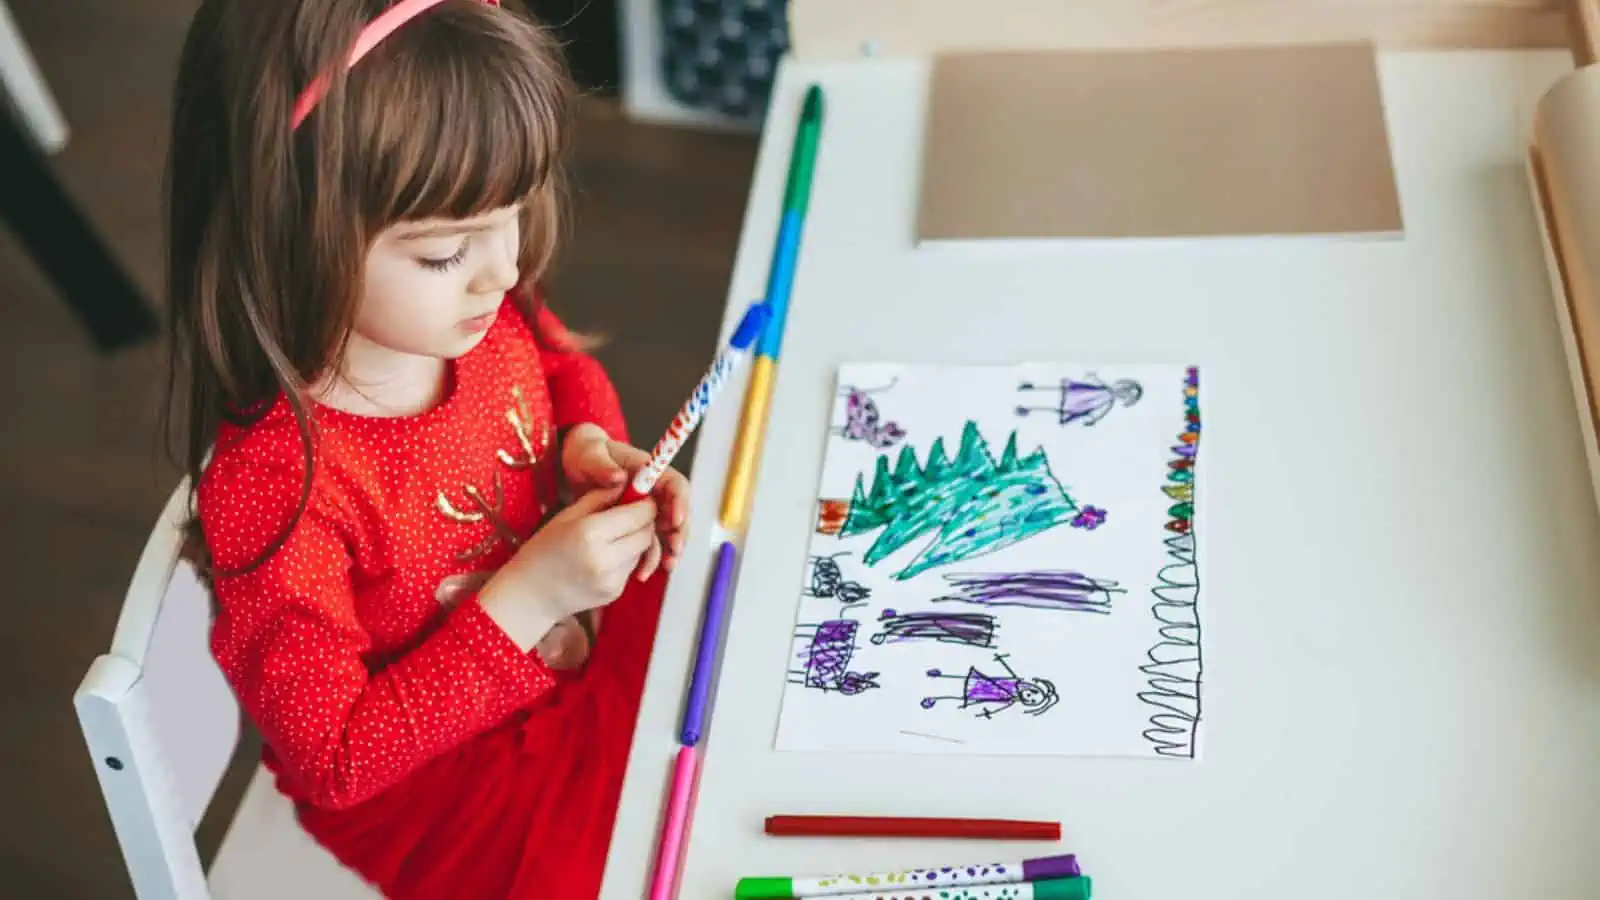 A little girl's imagination in a vibrant red dress joyfully sketching a Christmas-themed